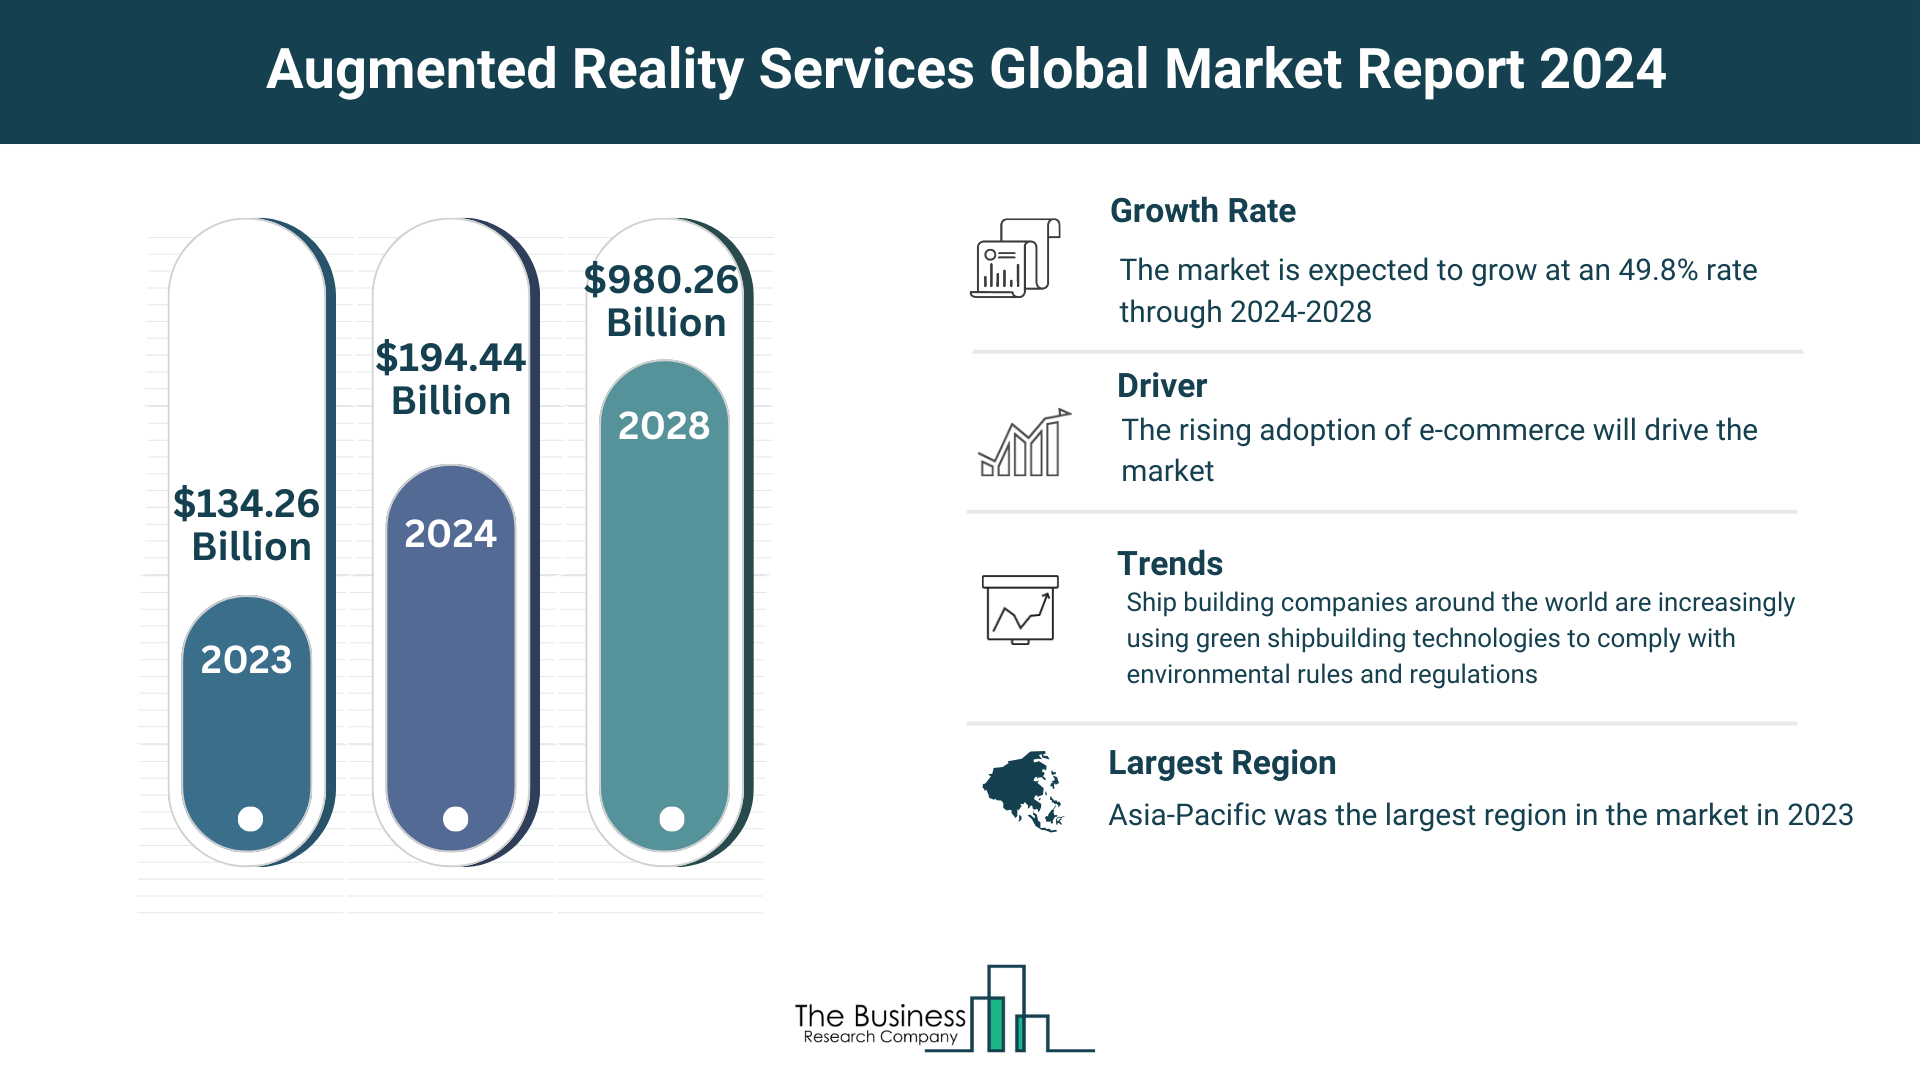 How Will Augmented Reality Services Market Grow Through 2024-2033?